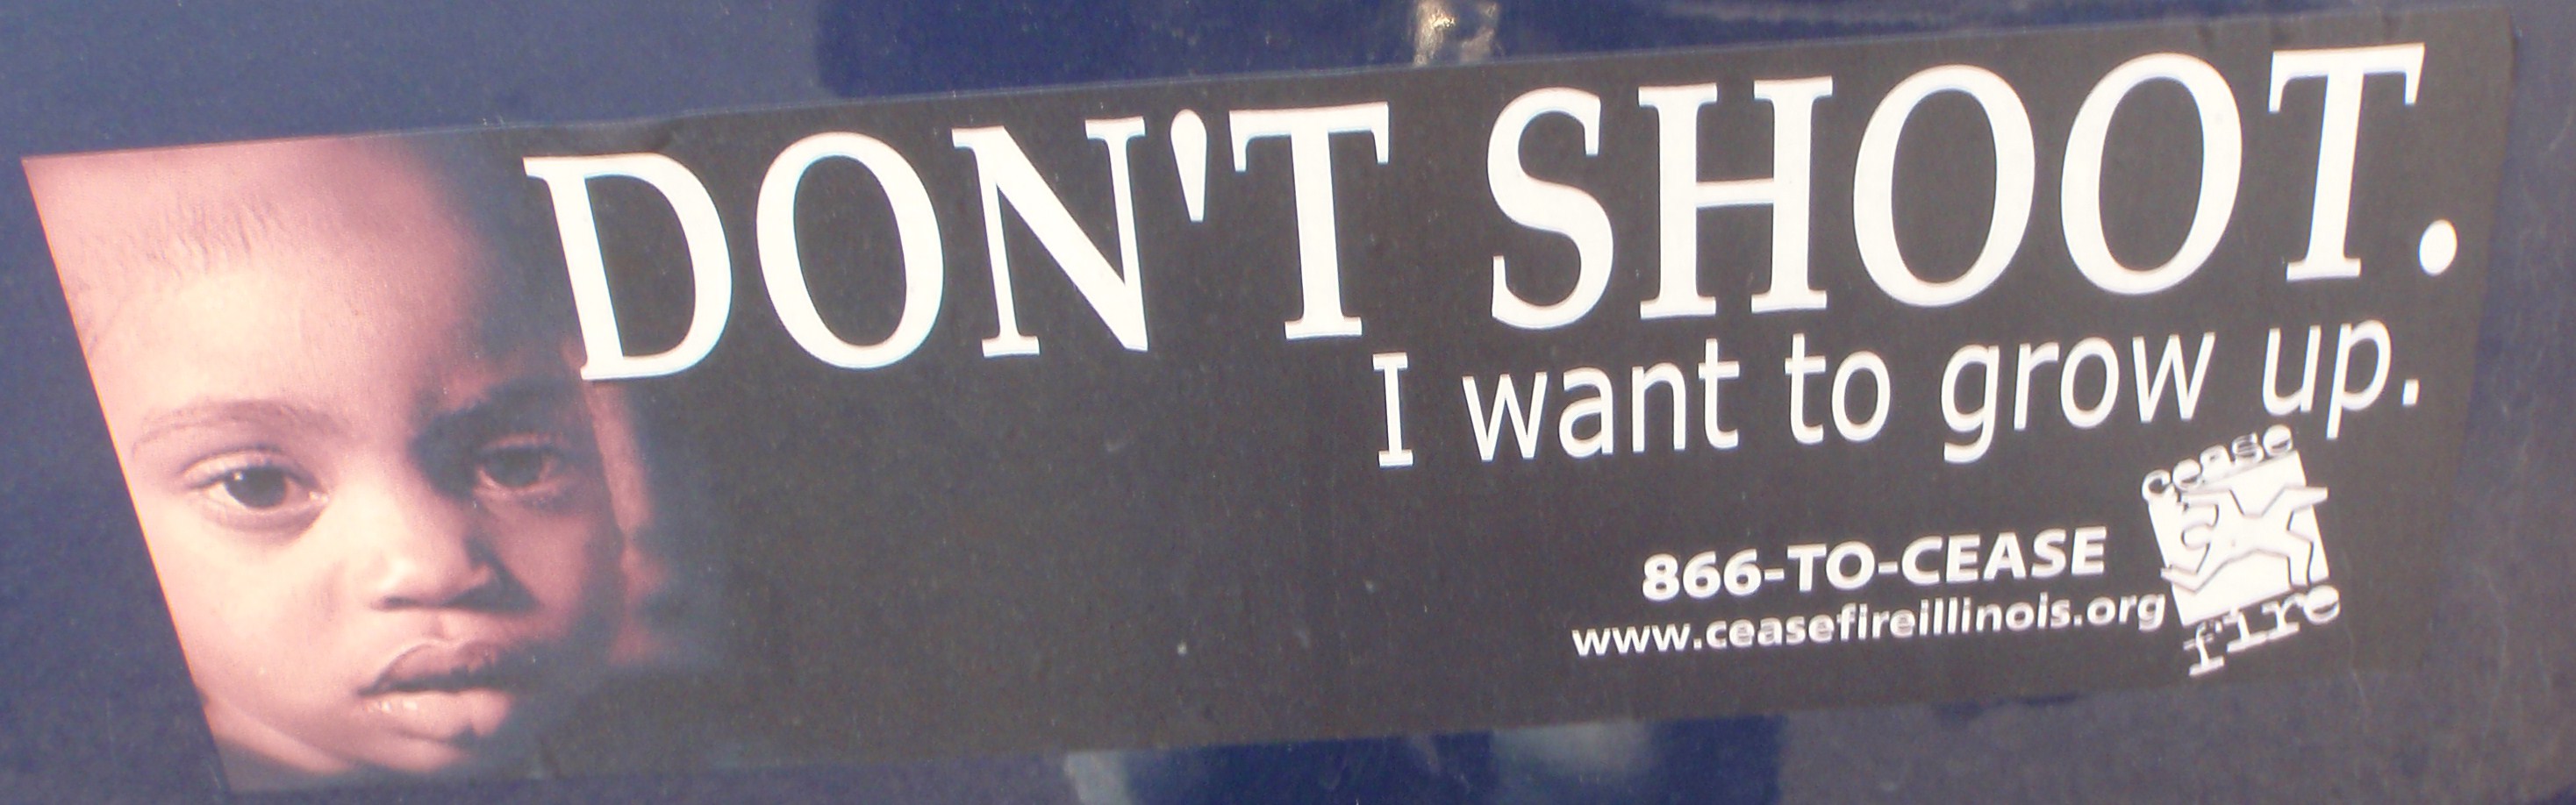 I saw this bumper sticker on a car in the parking lot of the Walmart in Orland HIlls, Illinois.